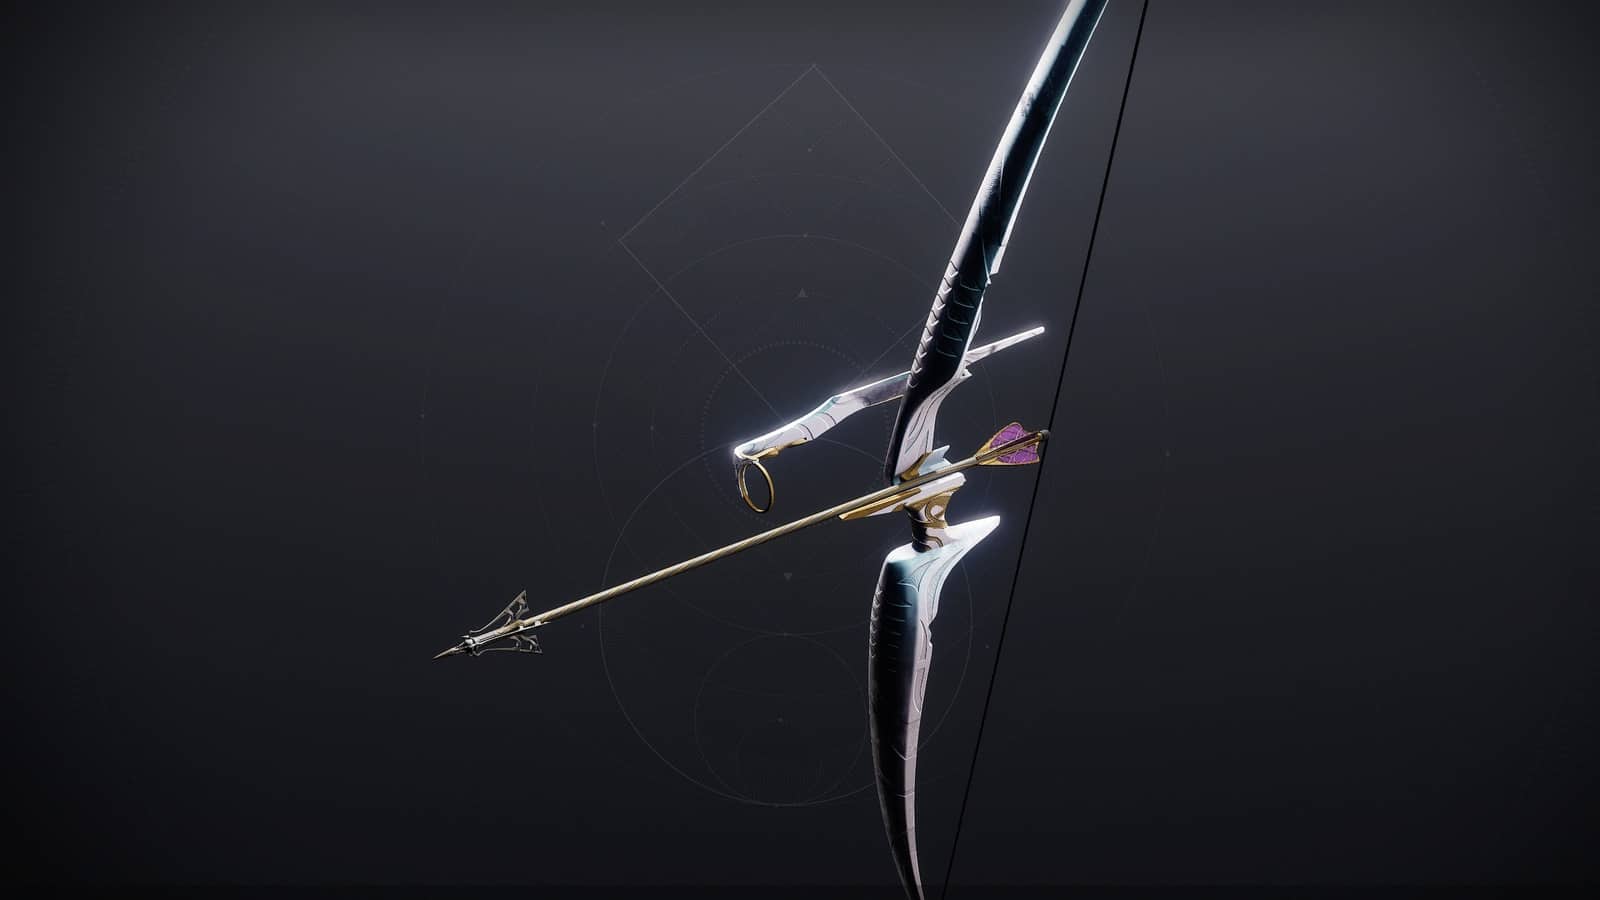 Wish Ender Destiny 2 featured bows